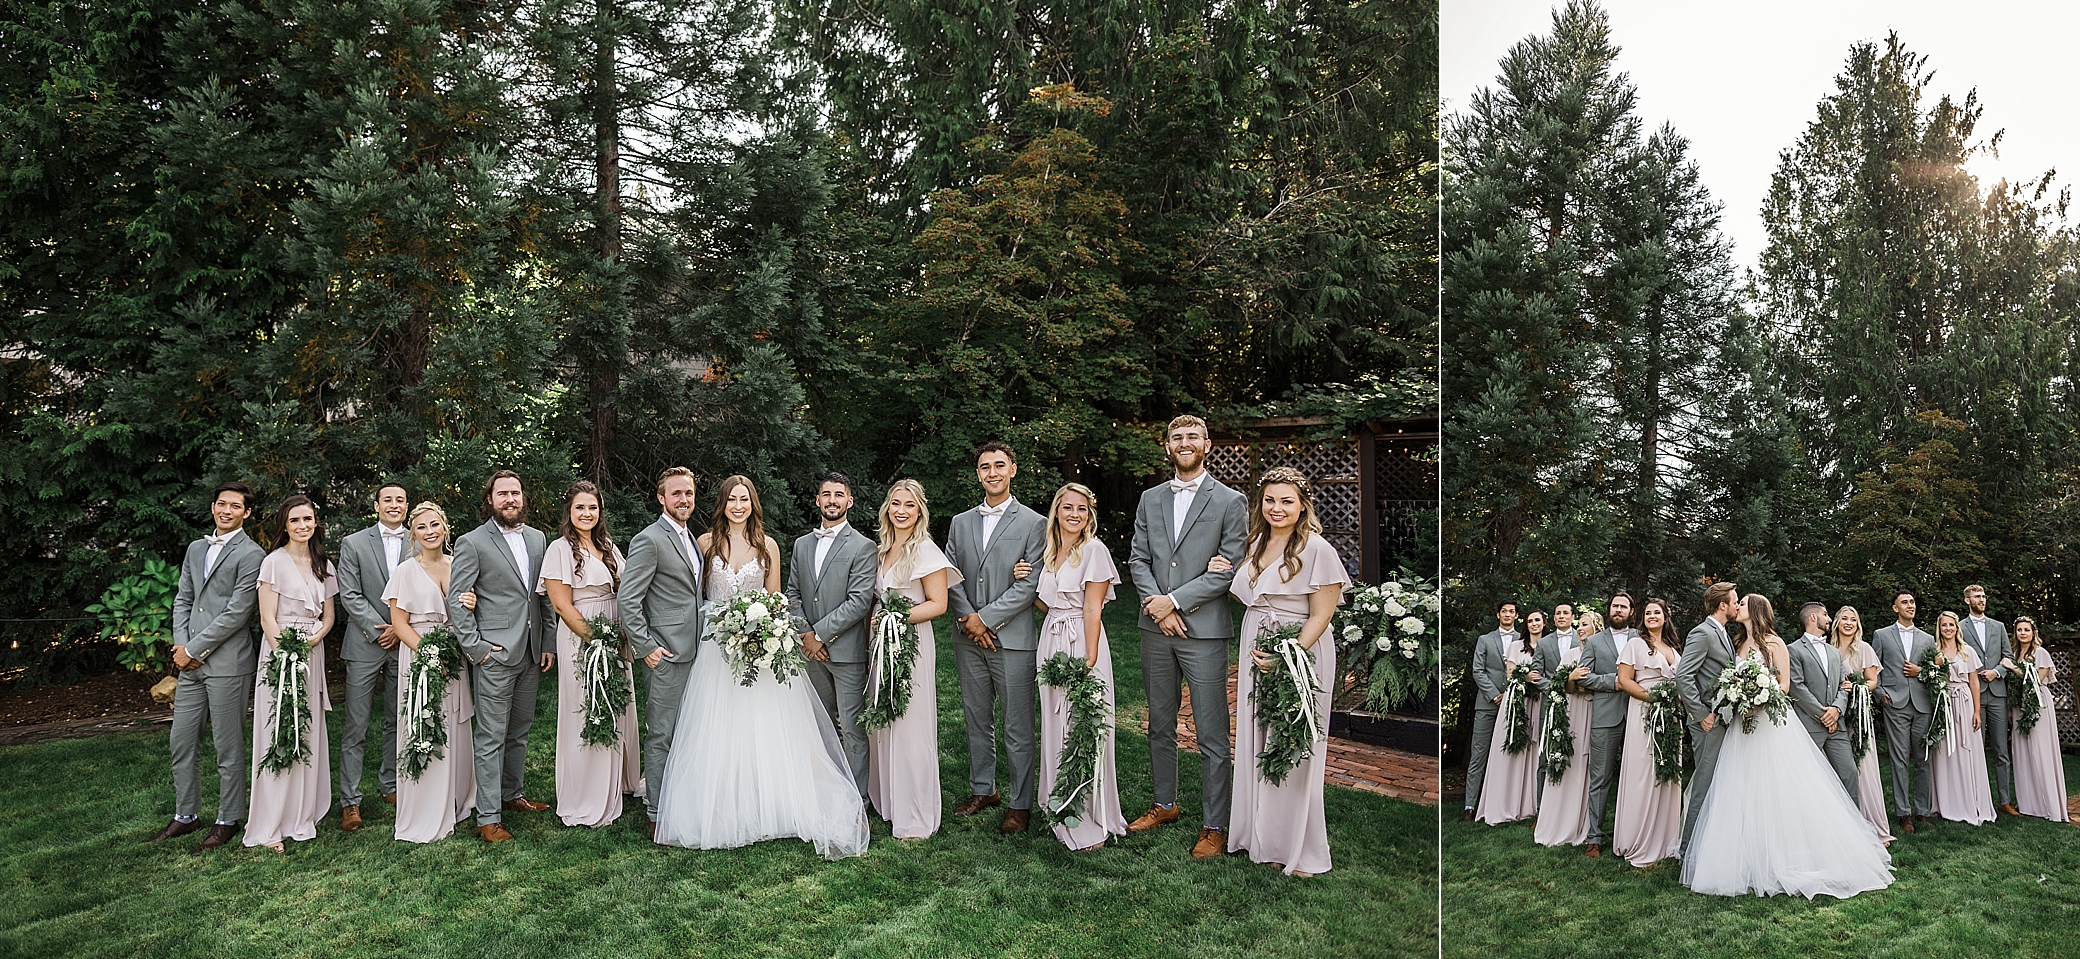 Bridal party photographed by Seattle Intimate Wedding Photographer, Megan Montalvo Photography